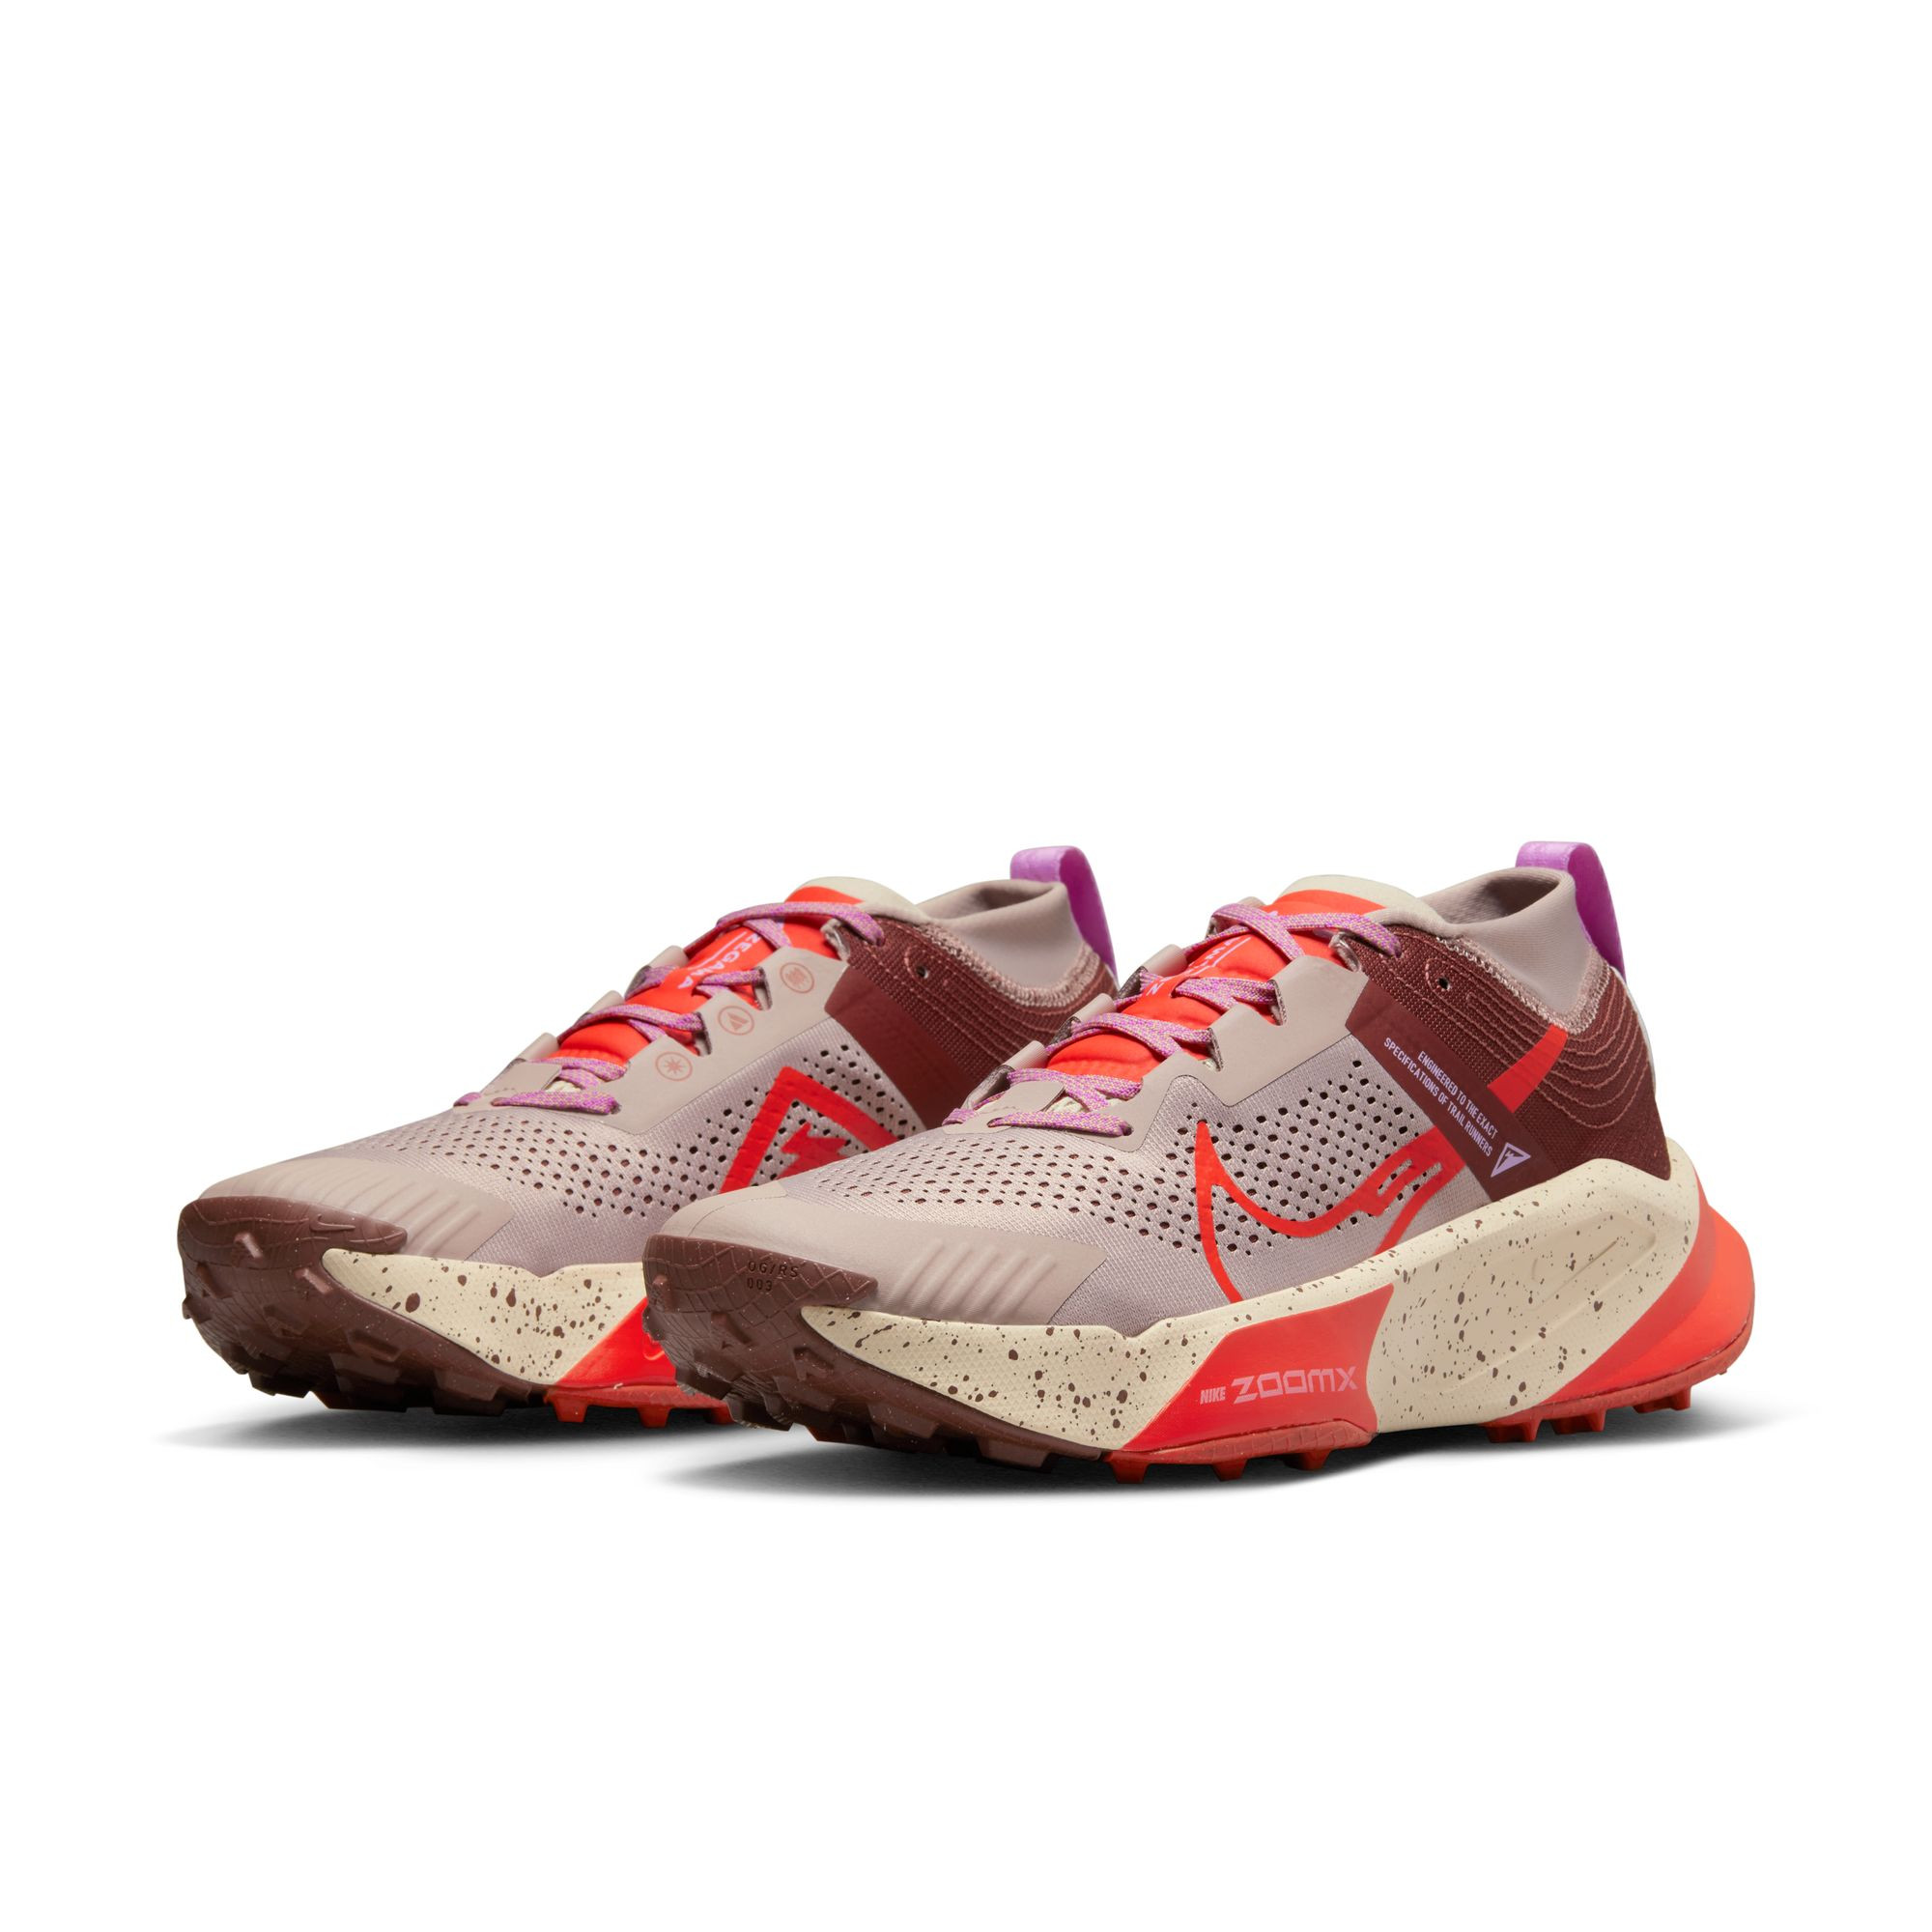 Nike ZoomX Zegama Trail Running Shoes - Diffuse Taupe/Picante Red-Dark Pony - DH0623-200